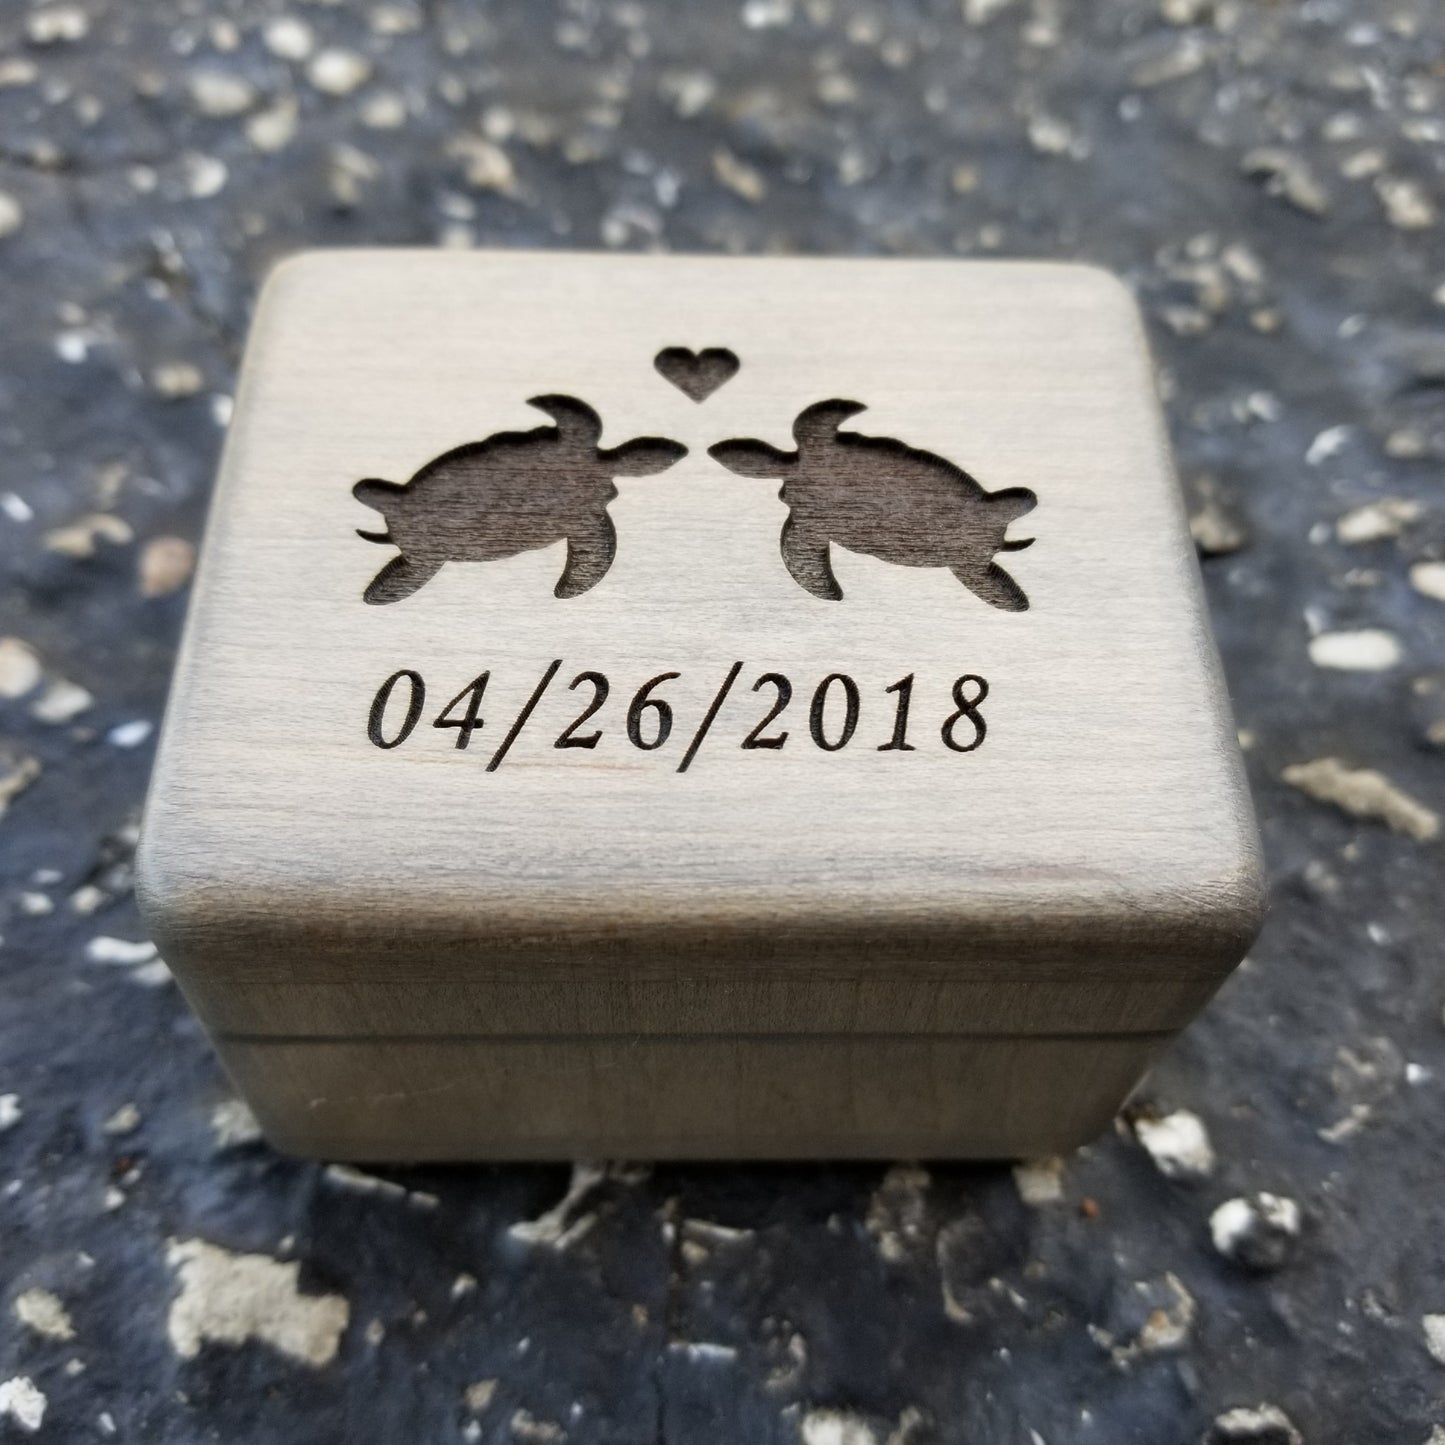 sea turtles ring holder, with your date engraved under the turtles